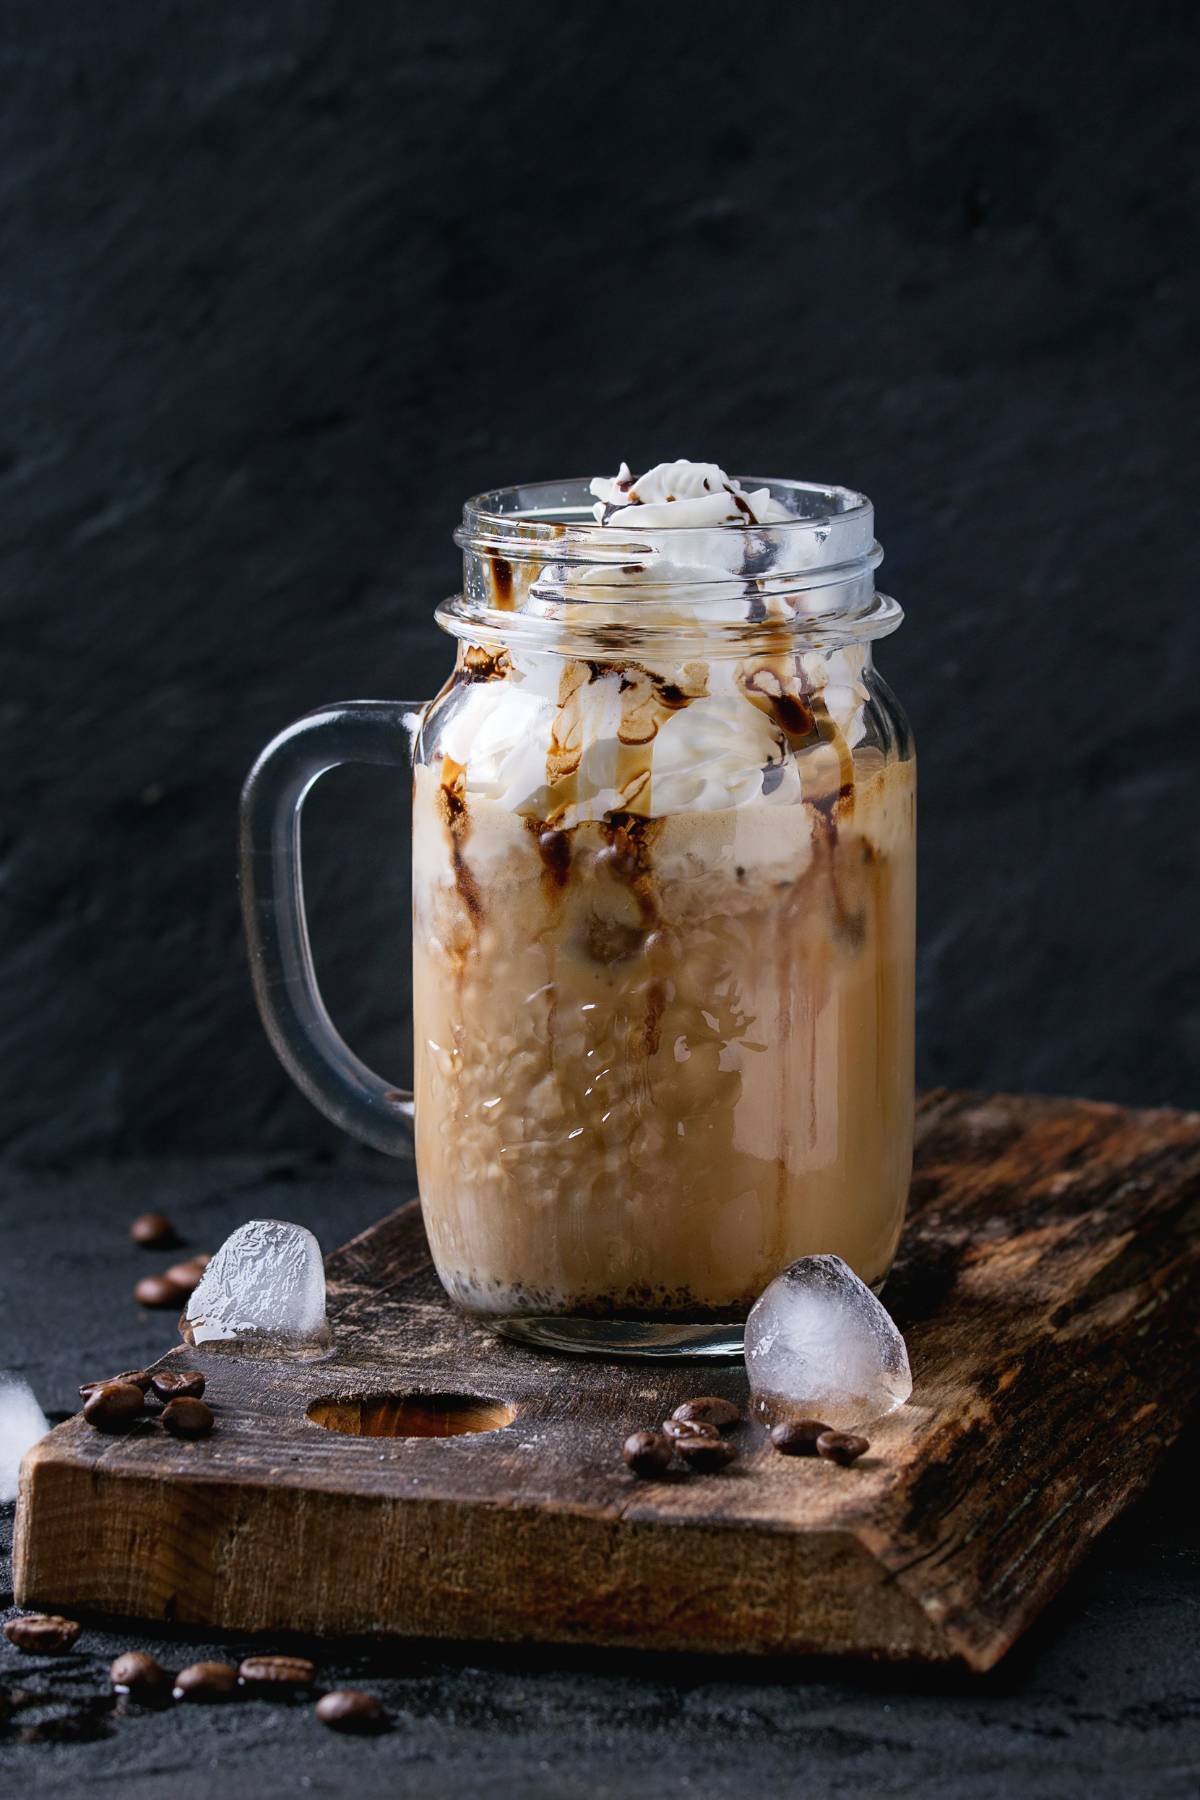 Starbucks-Inspired Drink Your Guests Will Love